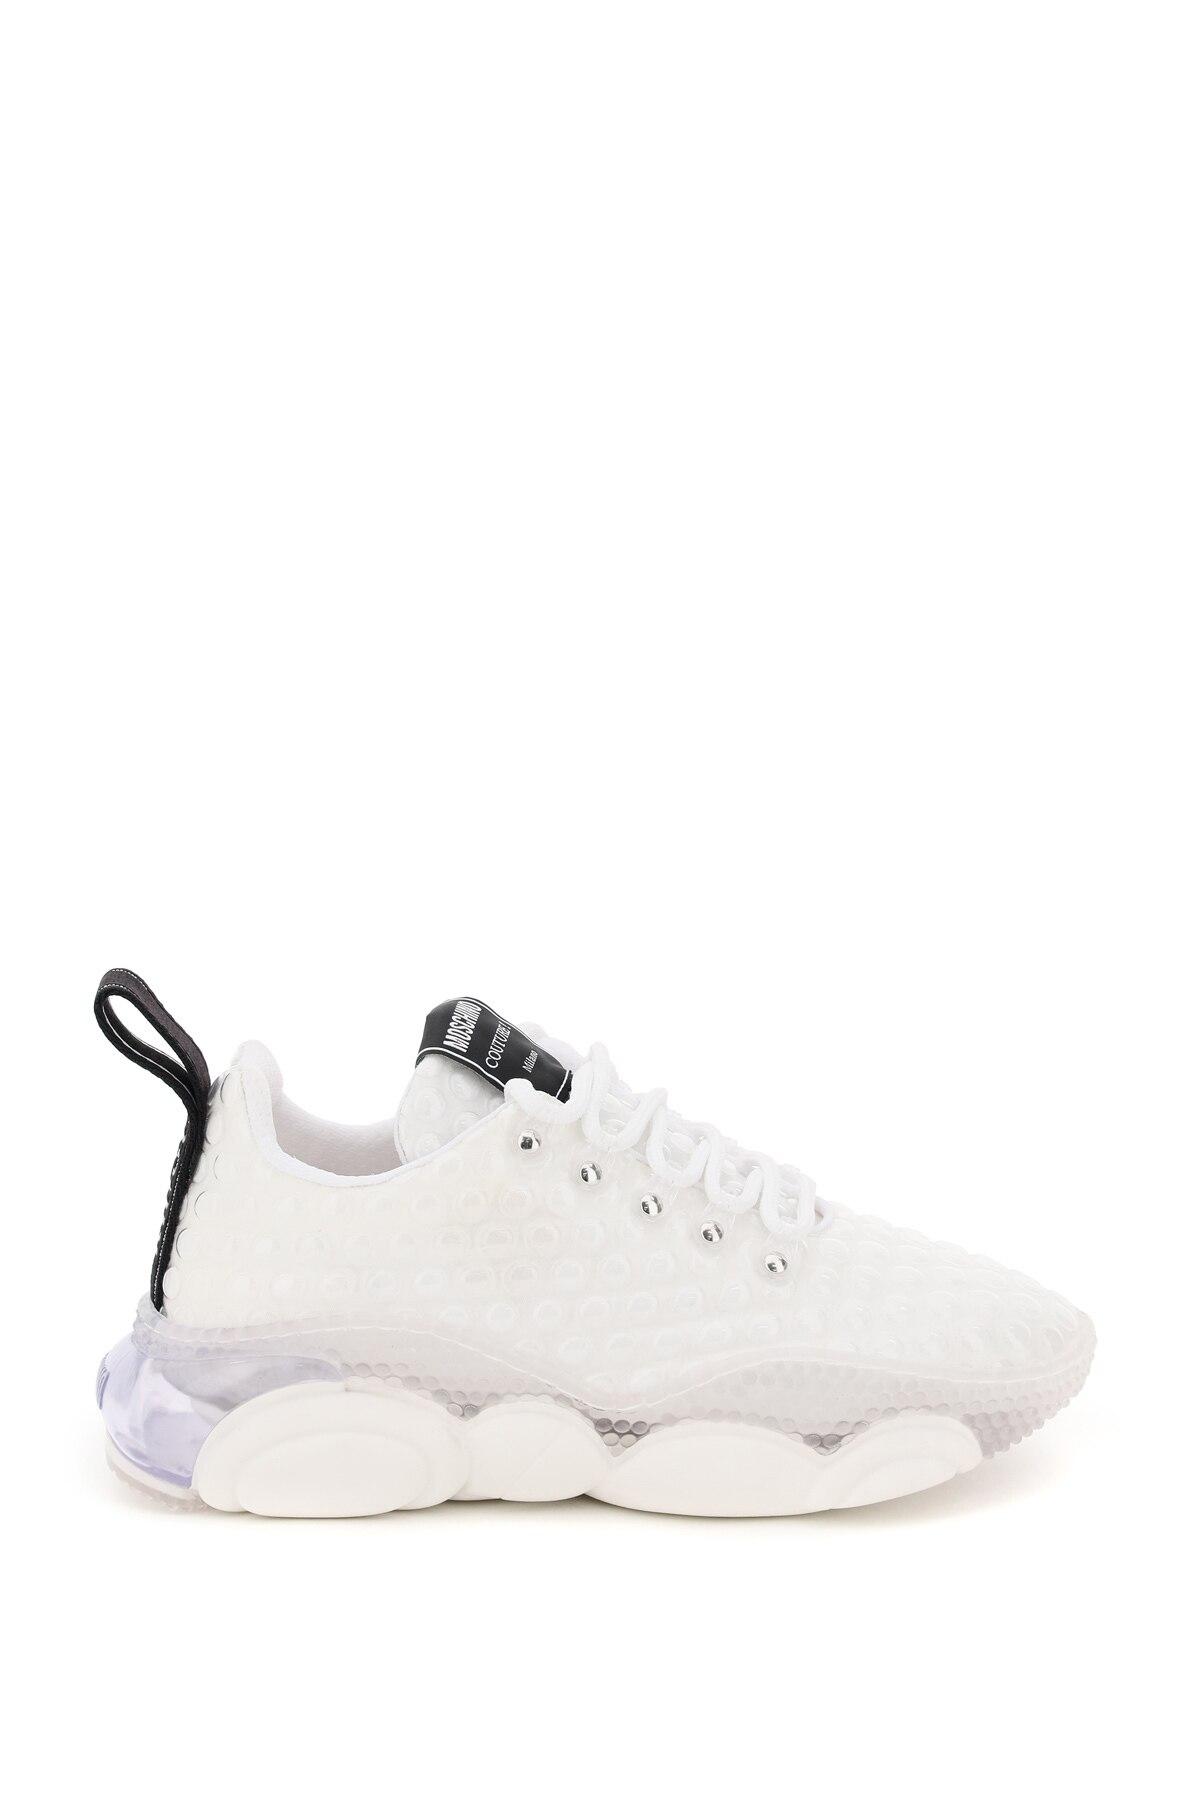 Moschino Teddy Double Bubble Sneakers in White | Lyst